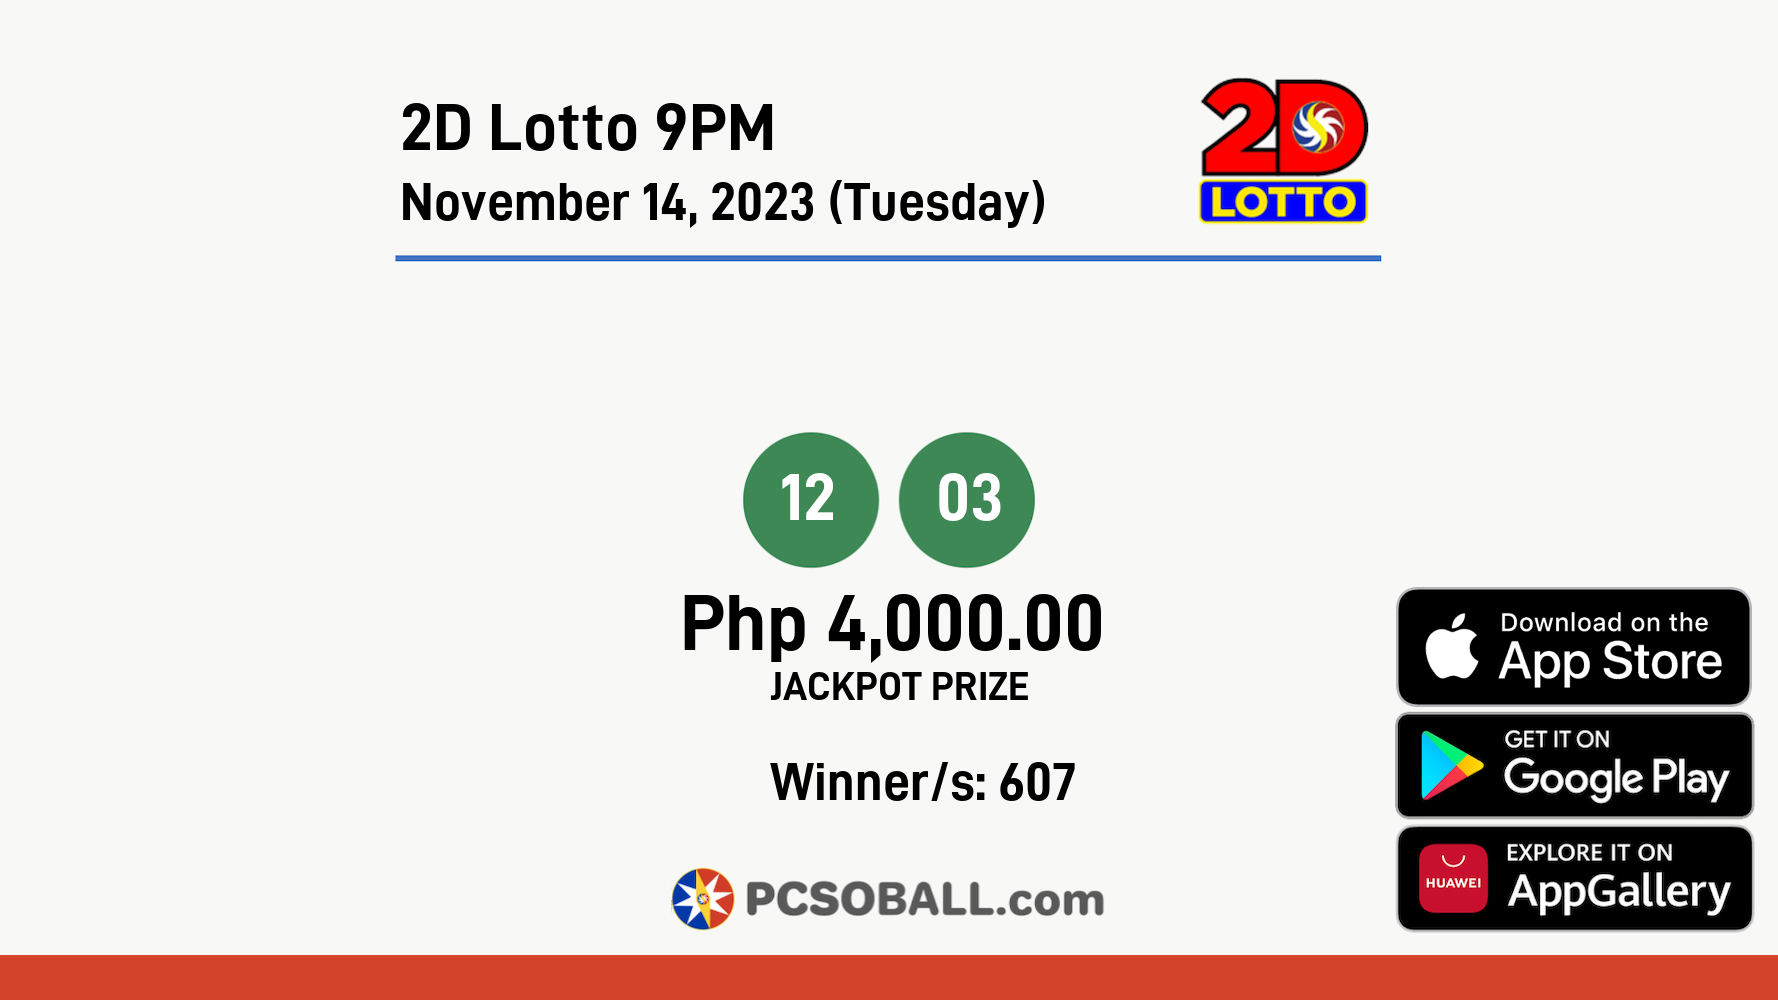 2D Lotto 9PM November 14, 2023 (Tuesday) Result